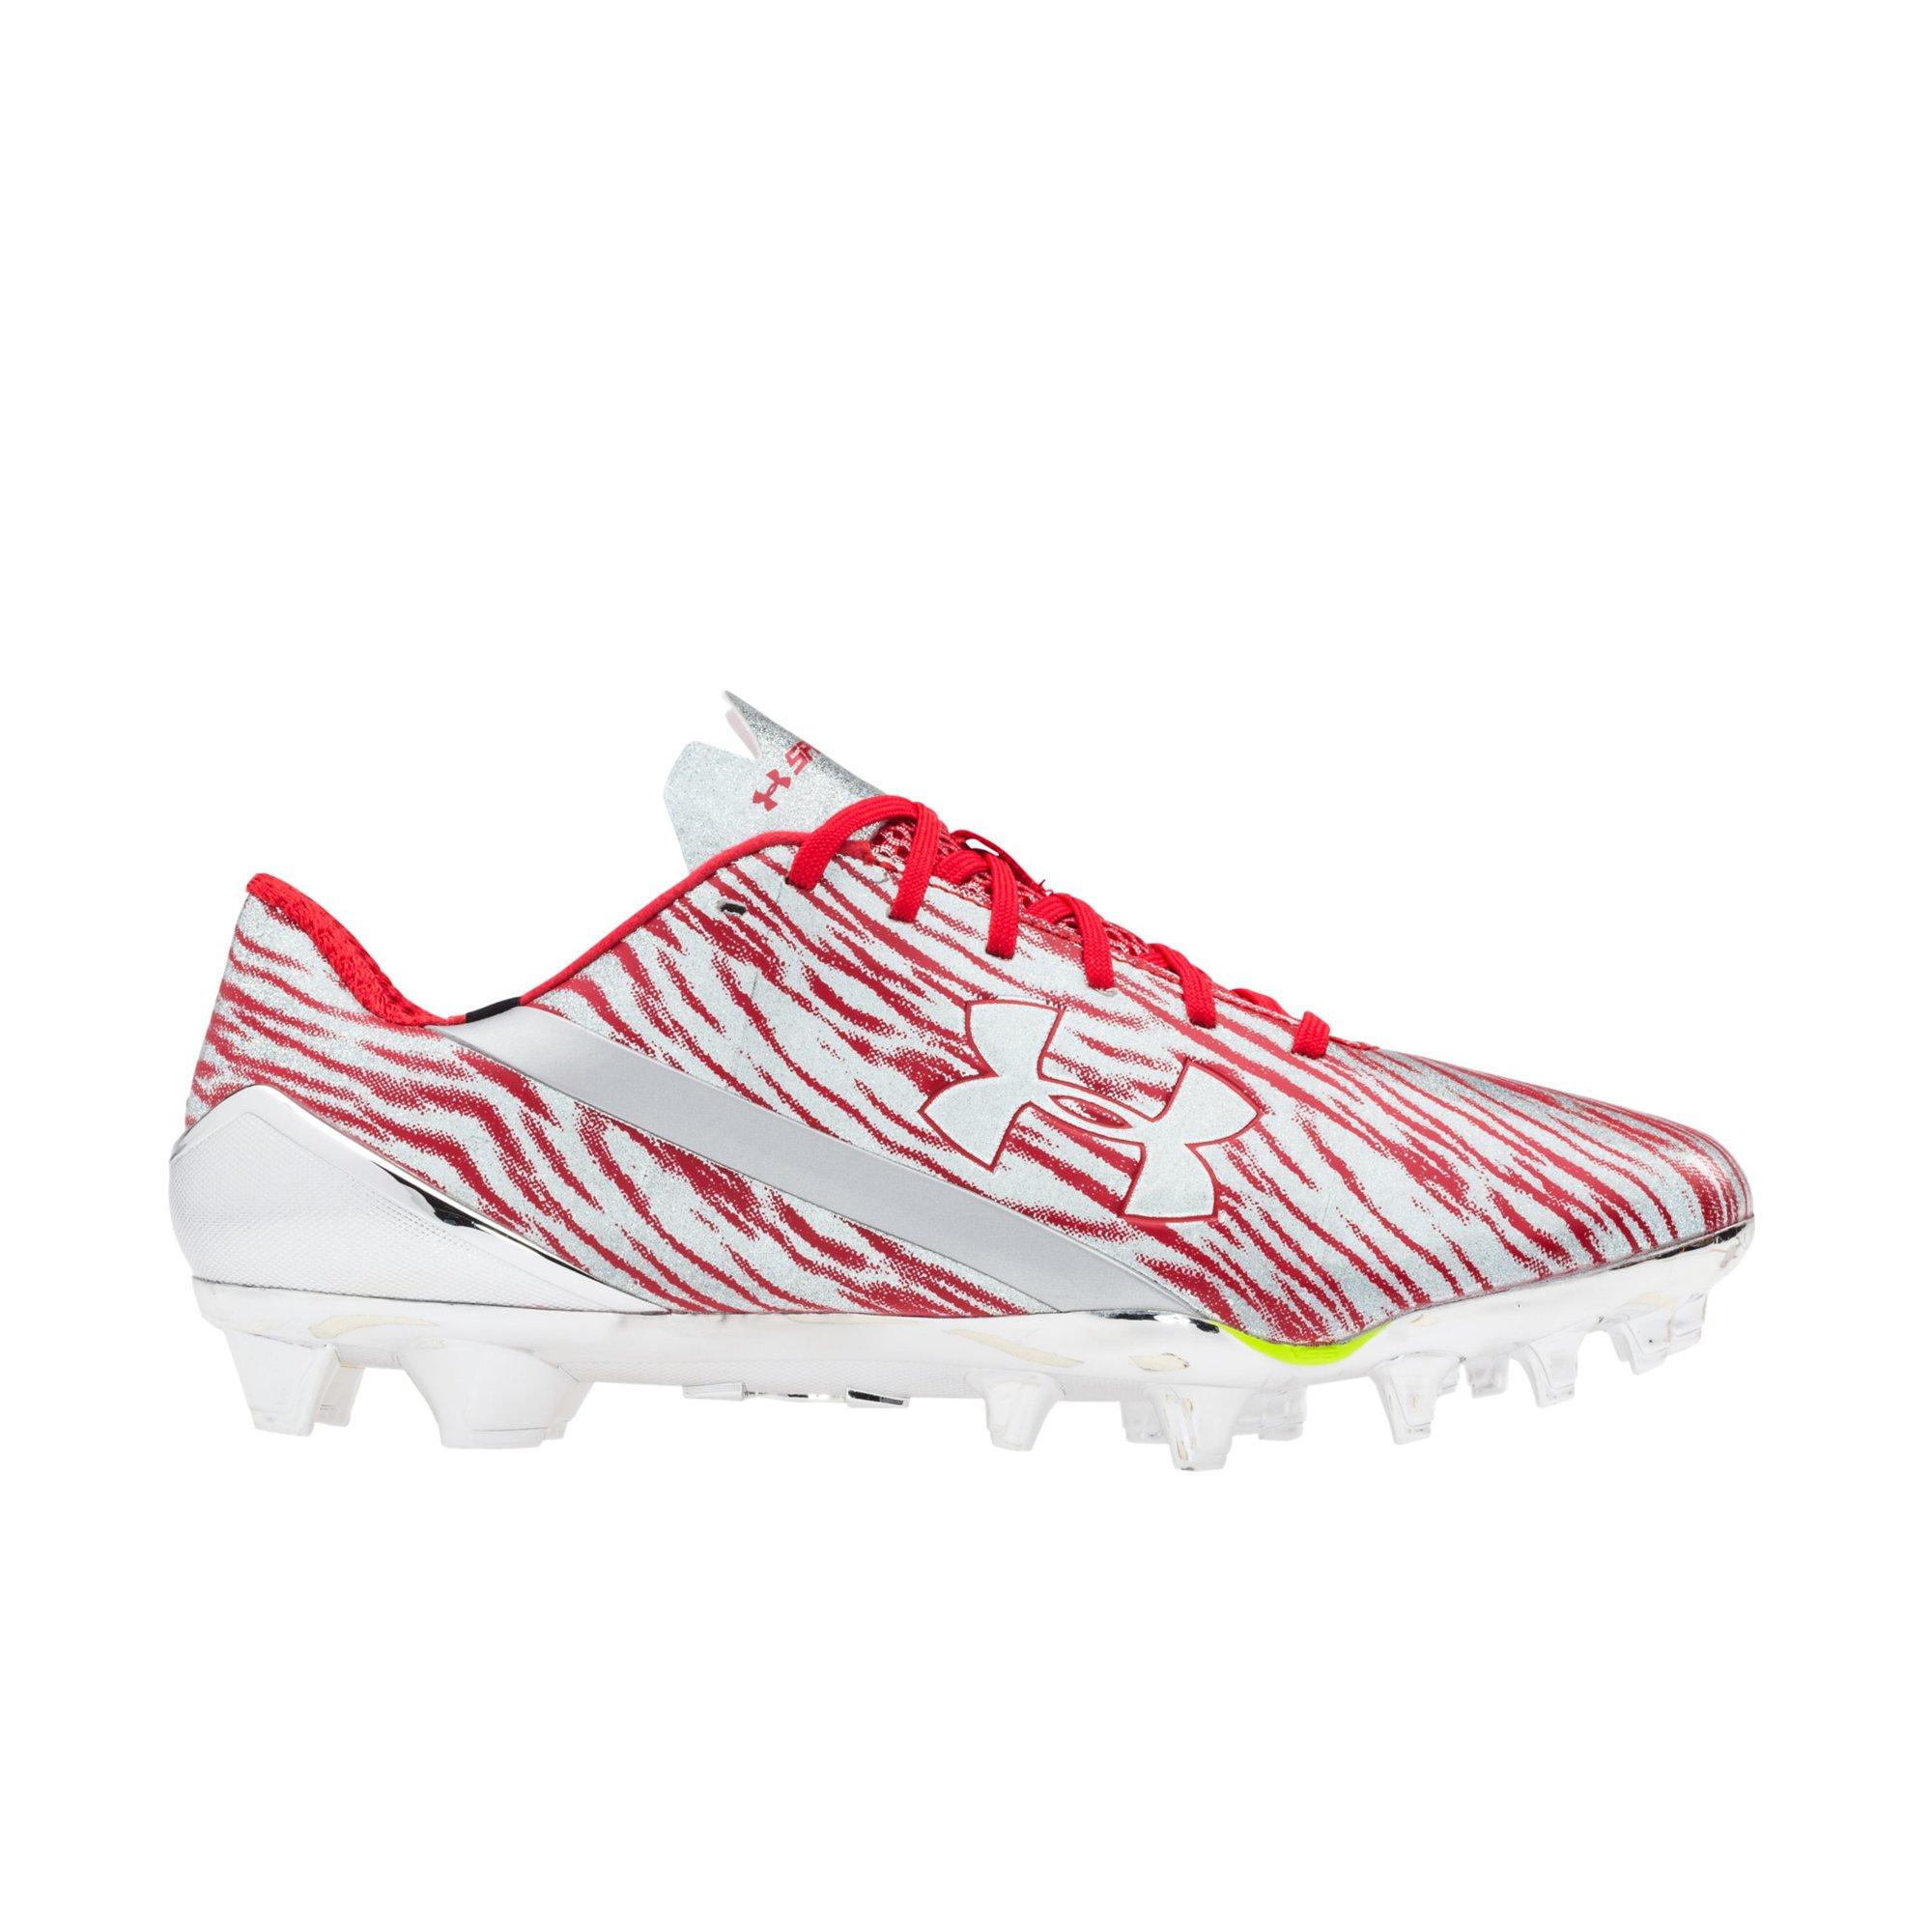 under armour red football cleats